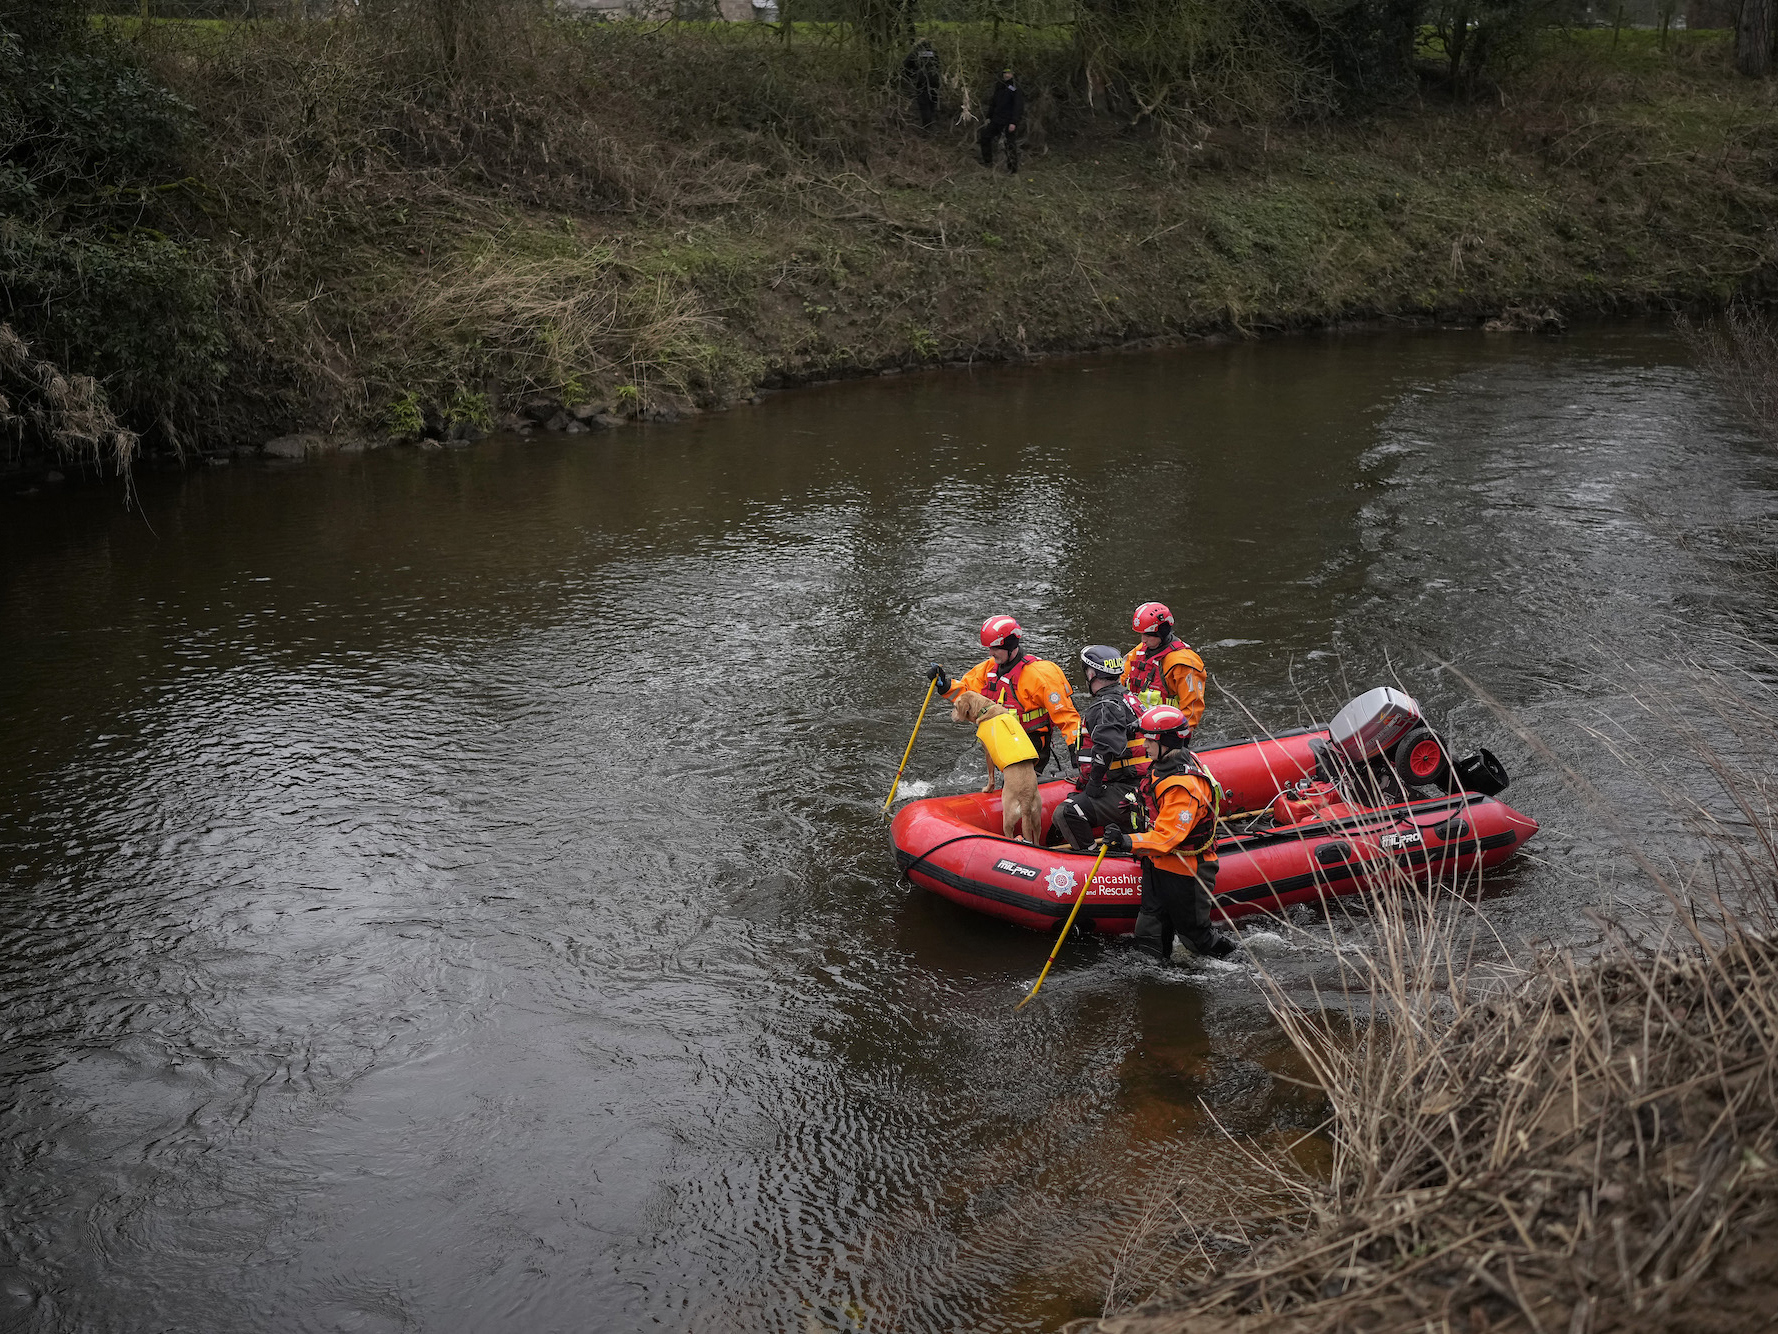 A search dog from Lancashire Police and a crew from Lancashire Fire and Rescue service search the River Wyre for missing woman Nicola Bulley in the village of St Michael's on Wyre, UK.